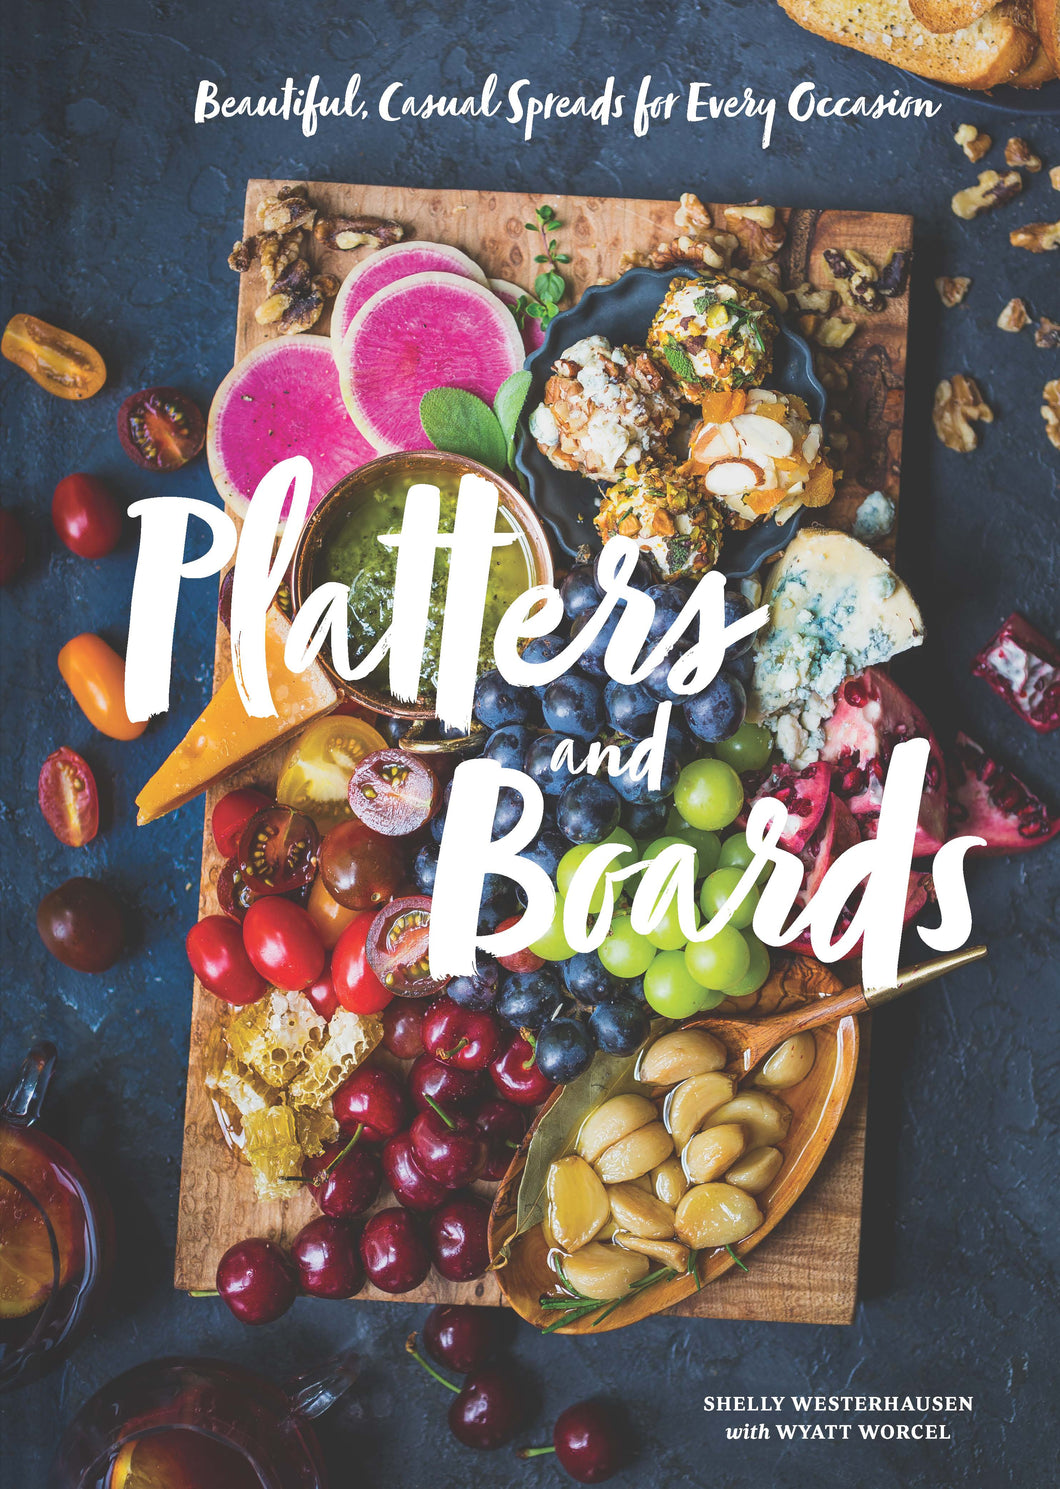 Book -  Platters And Boards